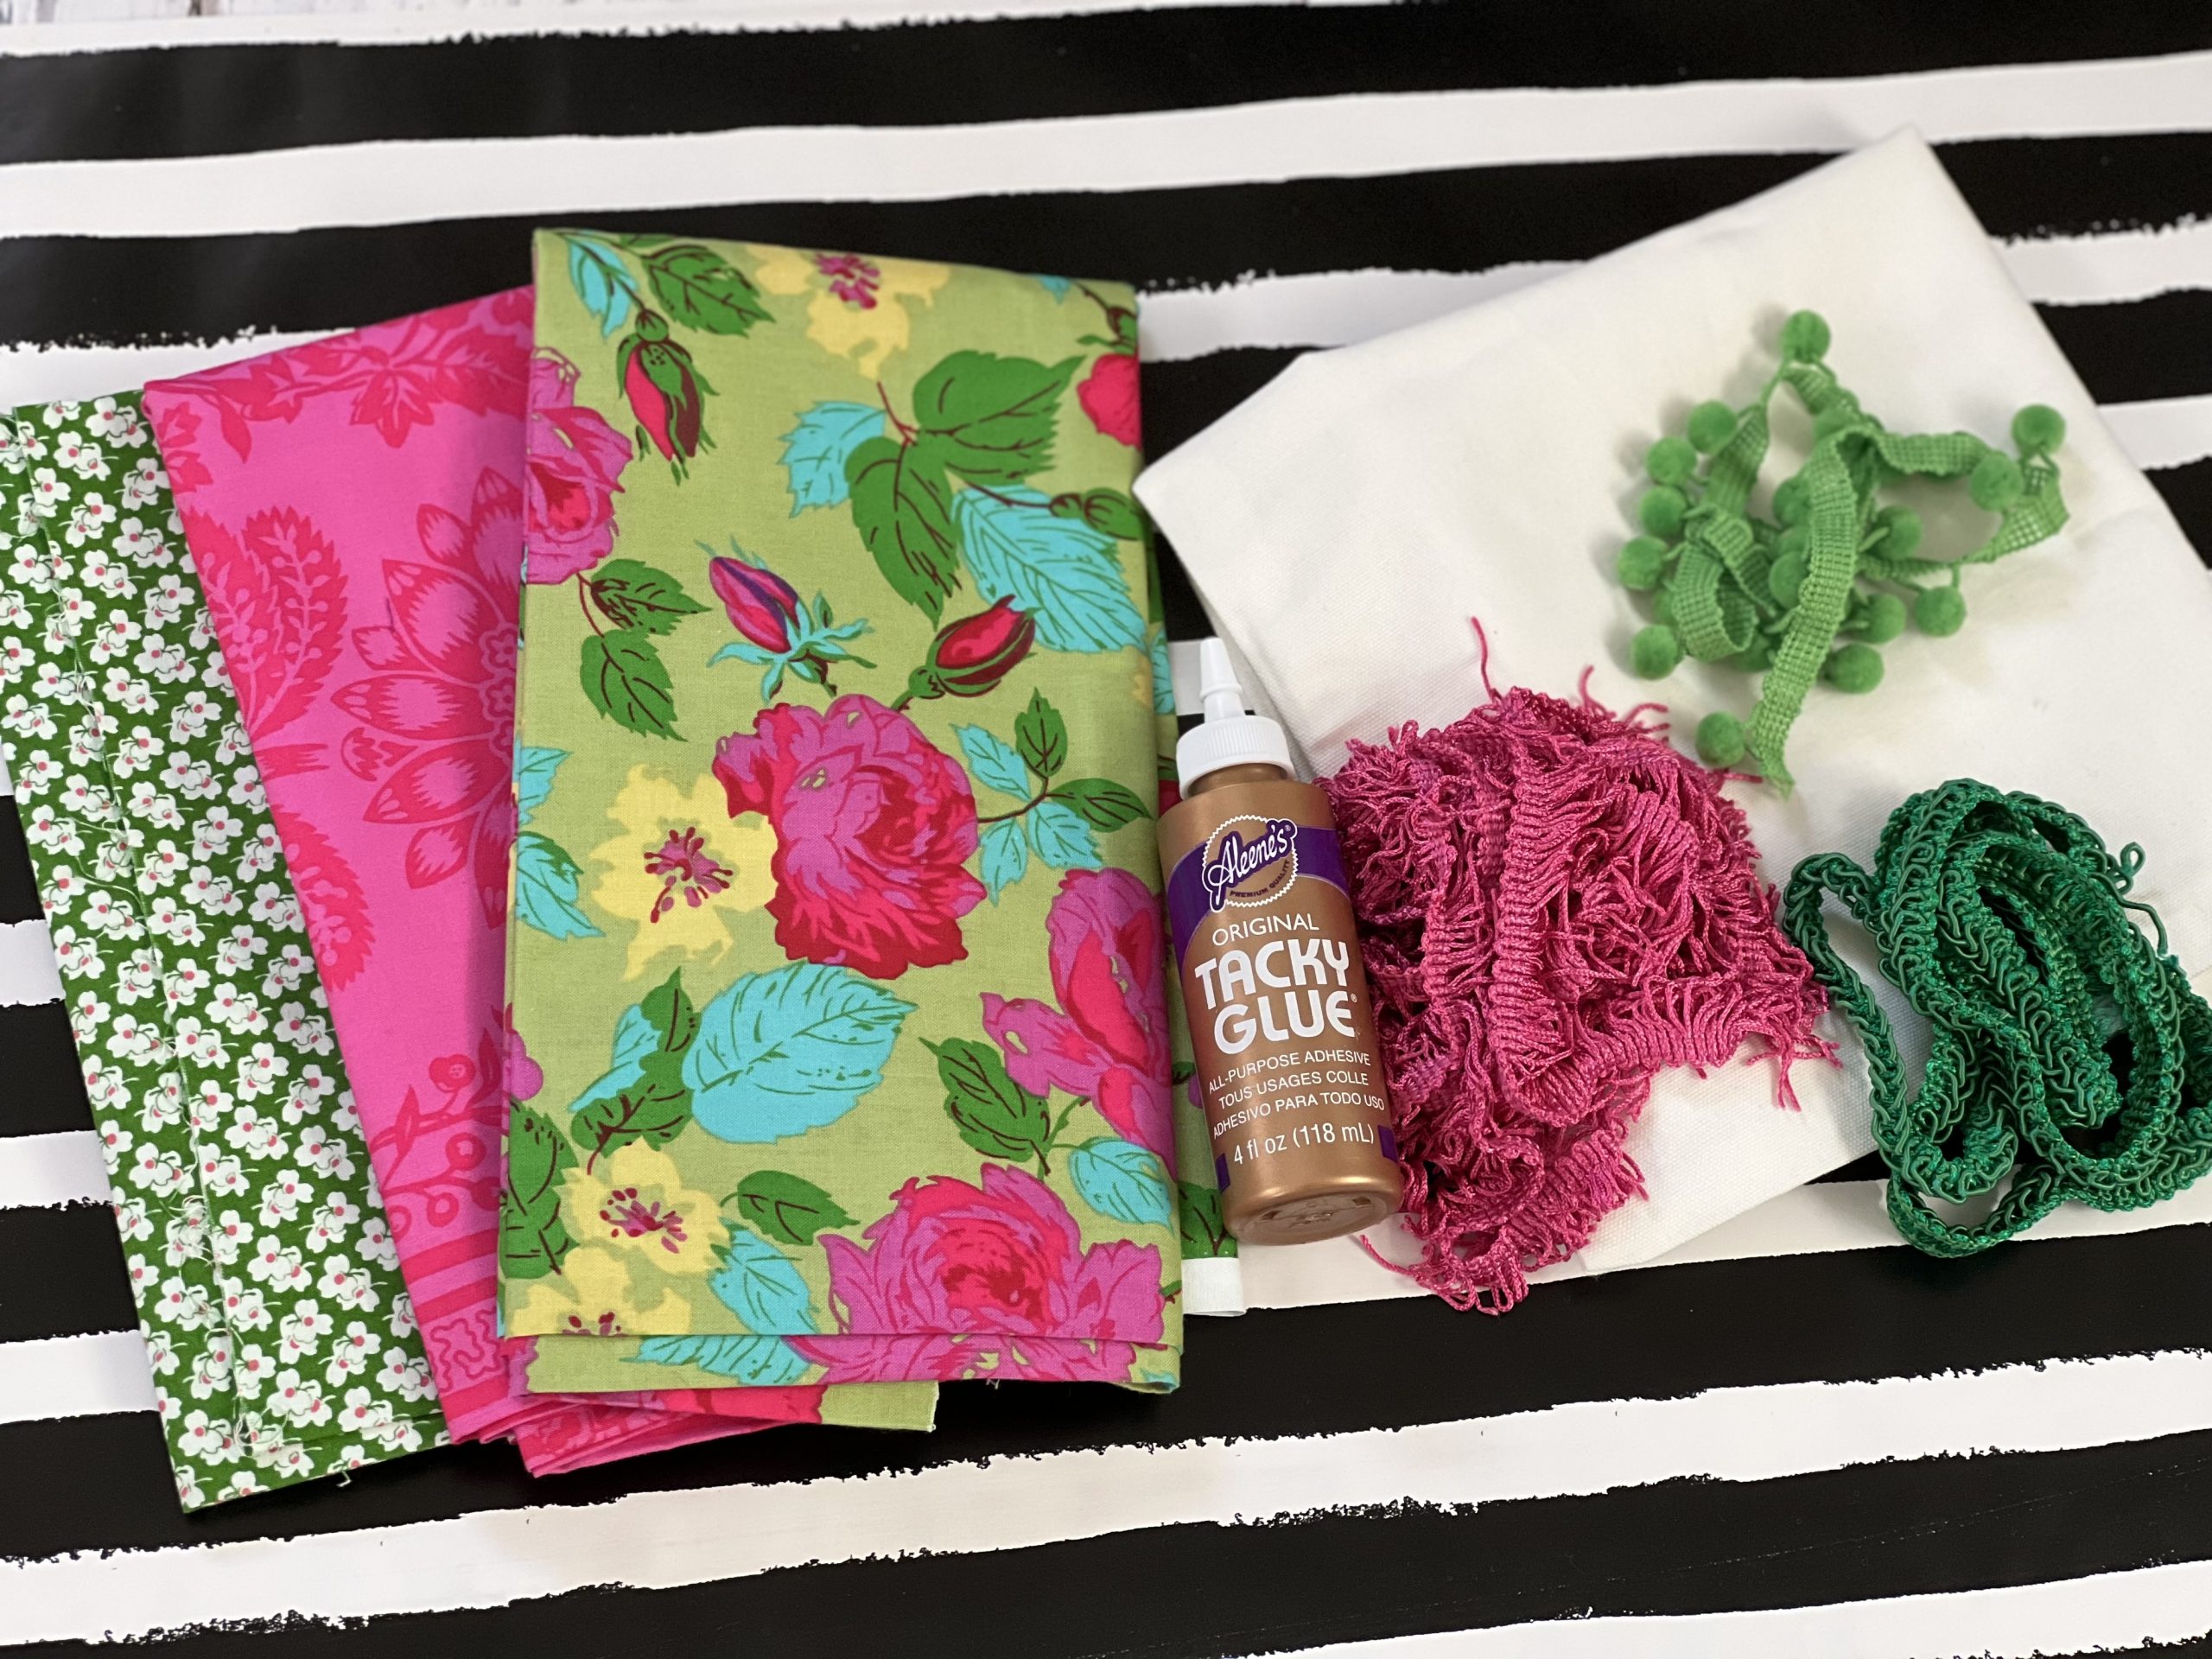 The Easiest Pillow Cover Ever - Organize and Decorate Everything